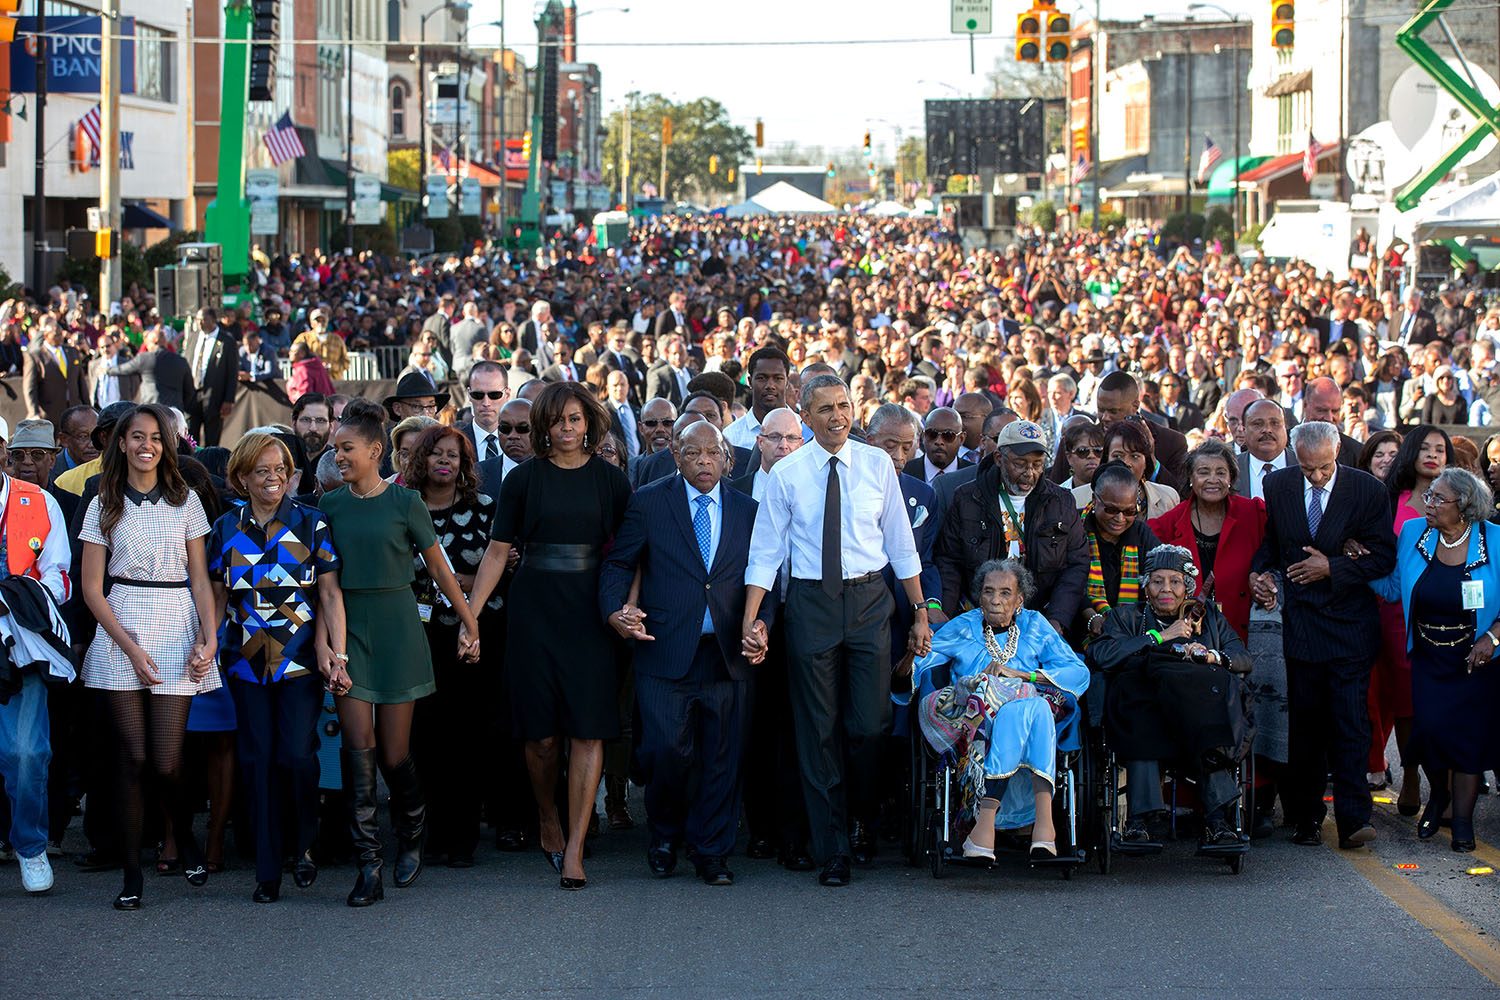 The First Family joined the crowd in beginning the walk across the Edmund Pettus Bridge, during the 50th anniversary of the Selma Marches, March 7, 2015. Official White House Photo by Lawrence Jackson 